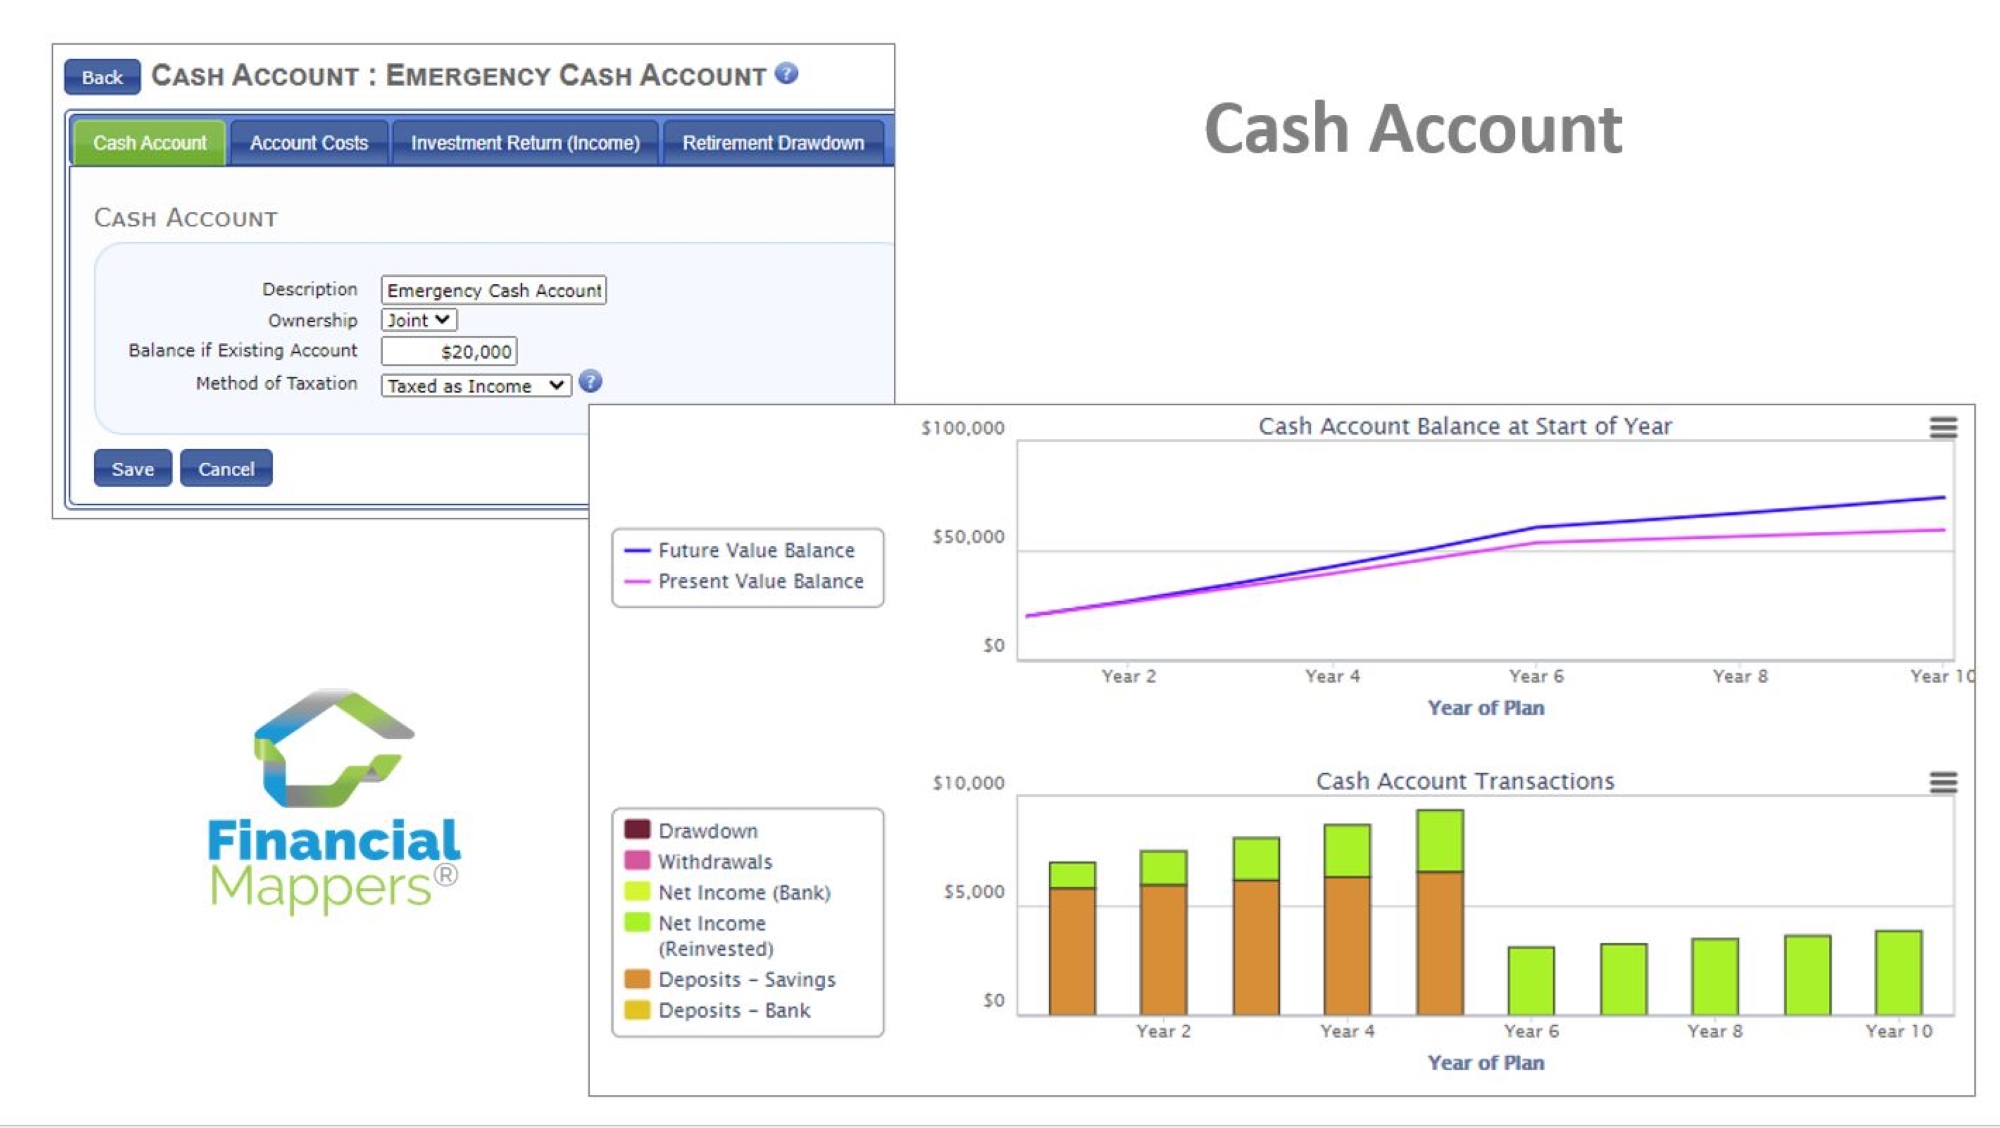 Add details of an Emergency Cash Account to Financial Mappers which is cash flow modelling software for investors, Financial Advisers, Accountants and Mortgage Brokers.